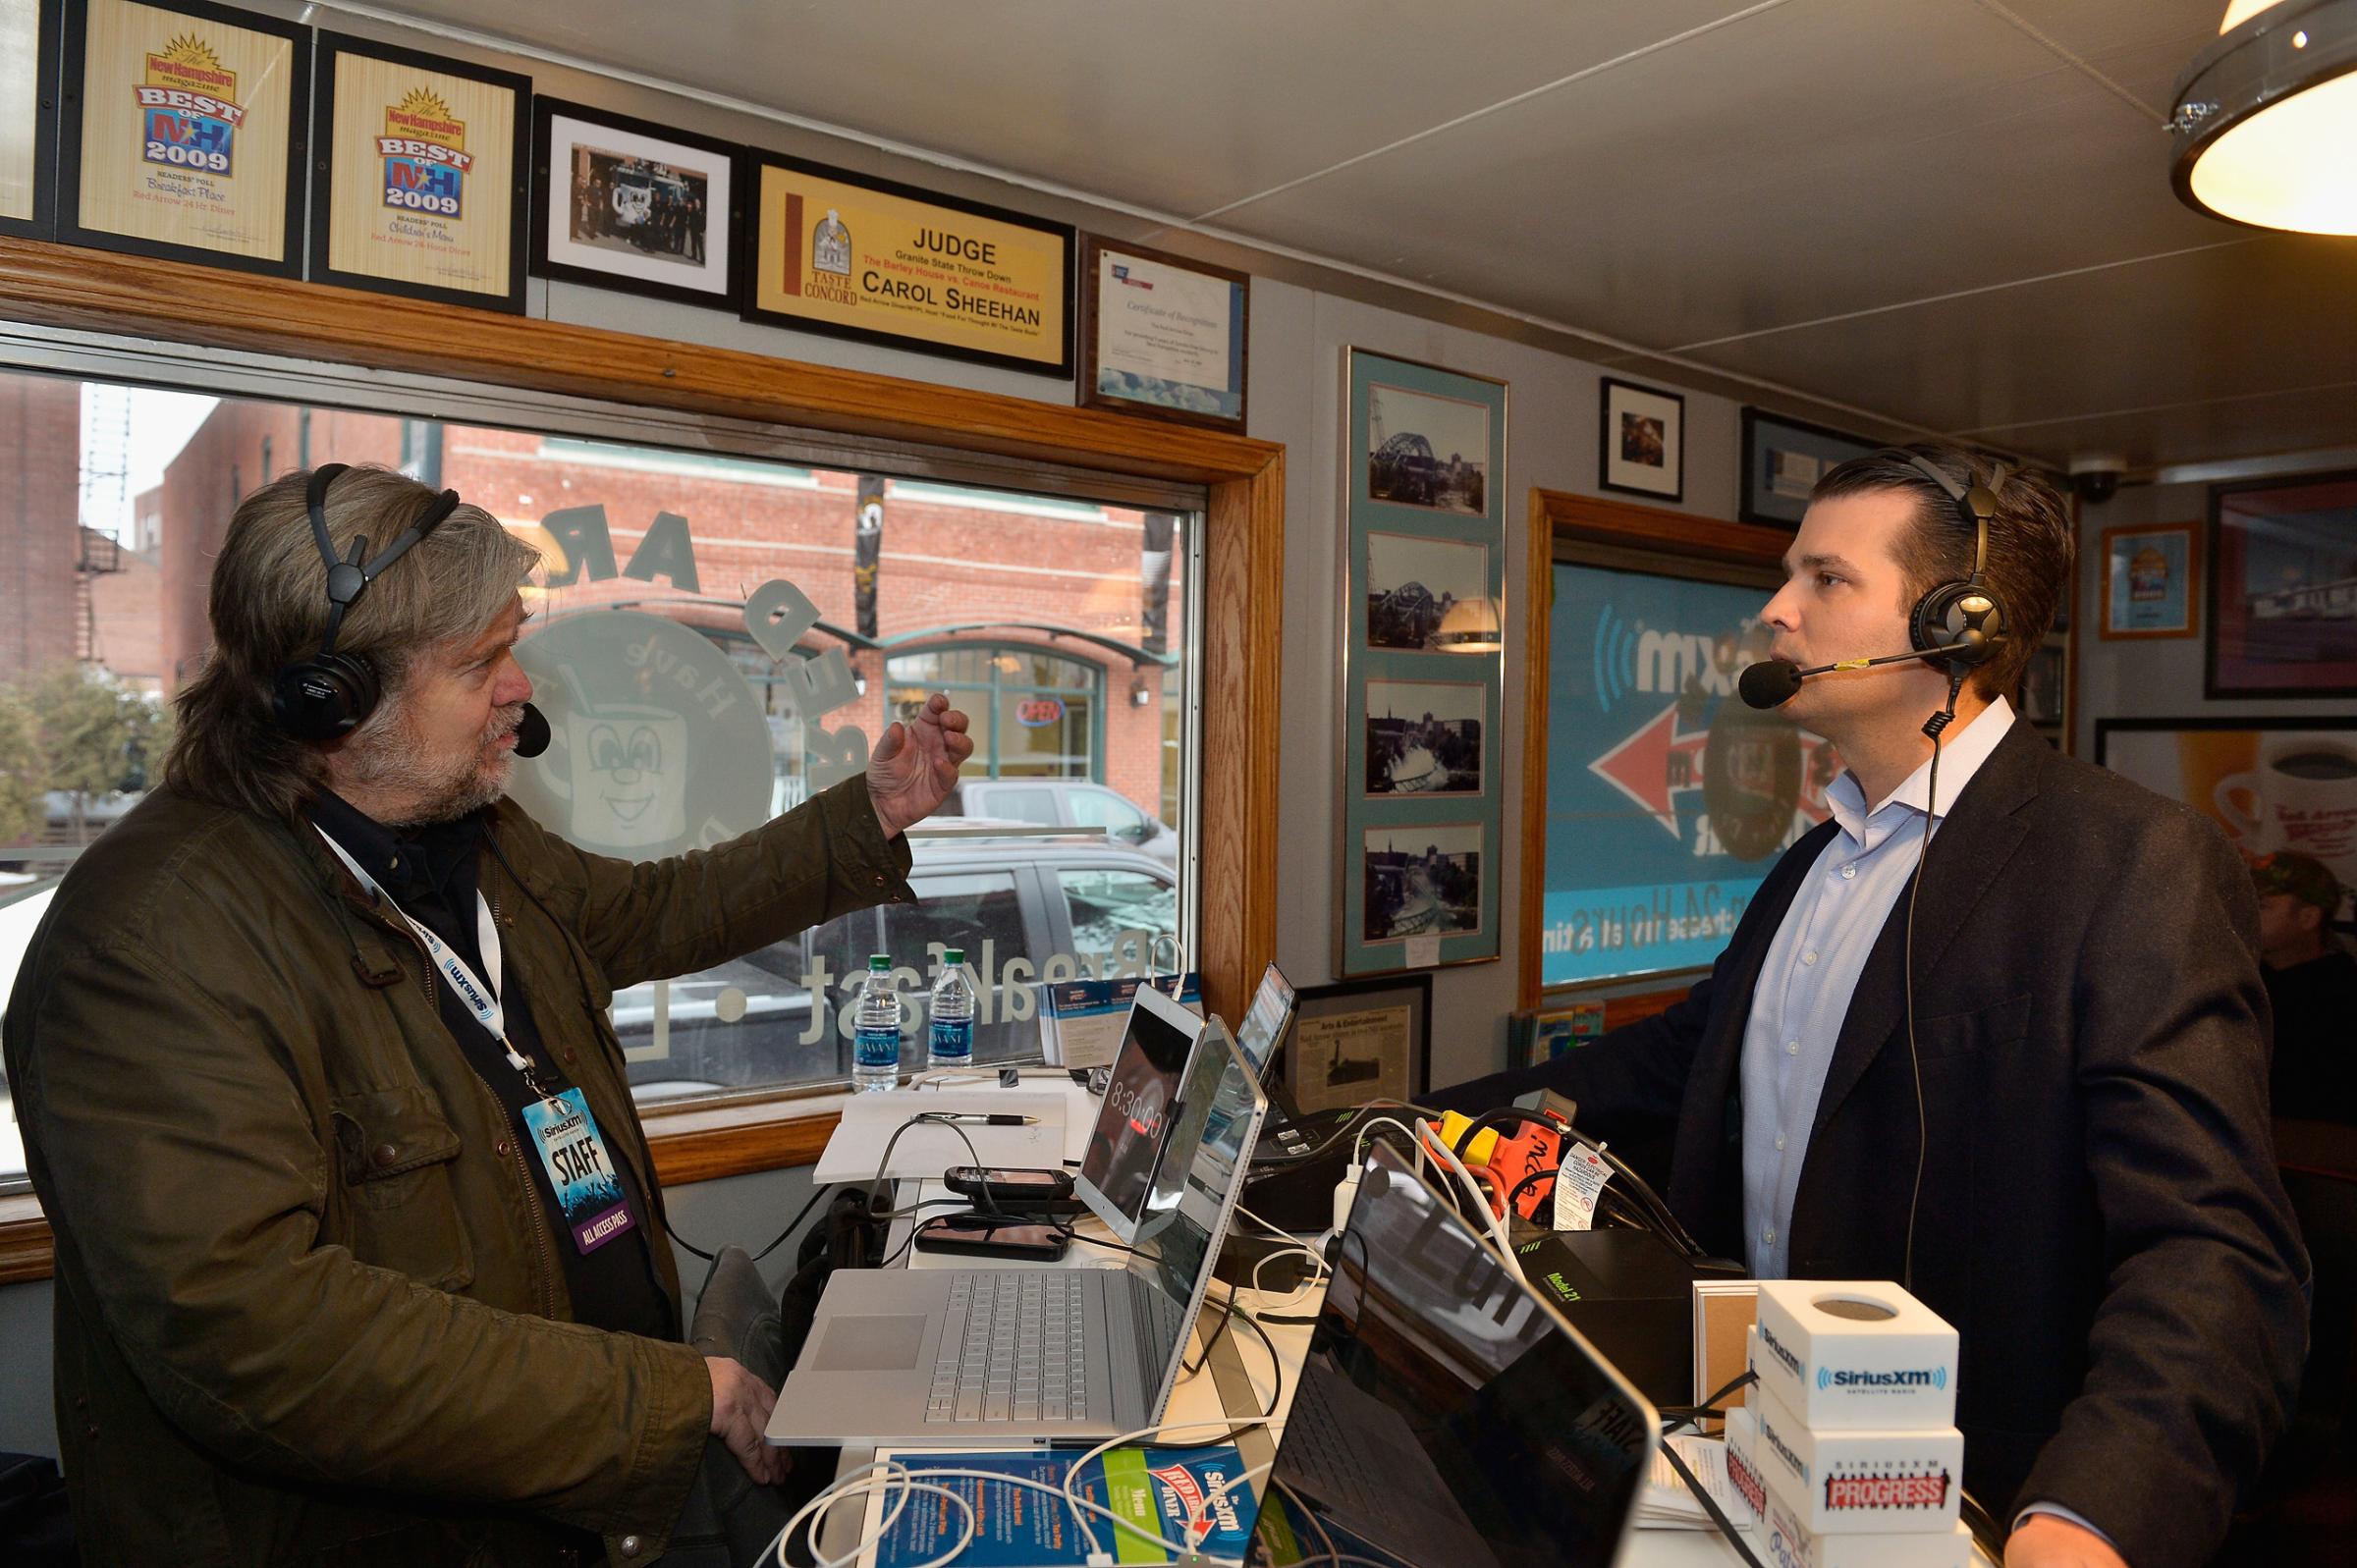 Breitbart News Daily's Steve Bannon interviews Donald Trump, Jr. for SiriusXM Broadcasts' New Hampshire Primary Coverage, live from the iconic Red Arrow Diner in Manchester, N.H., Feb. 8, 2016.